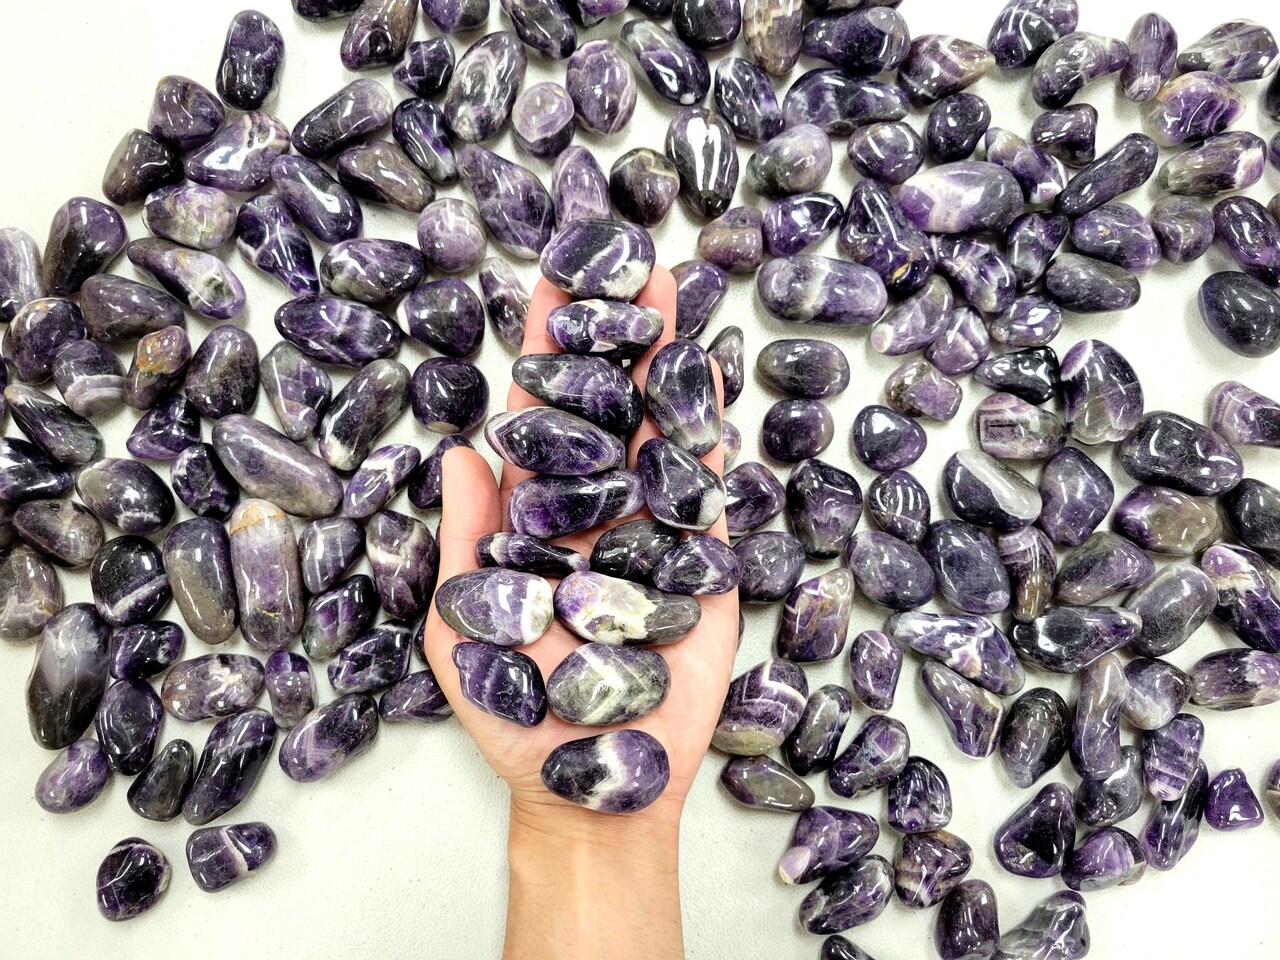 Tumbled Dark Amethyst Crystals From South Africa | Michaels